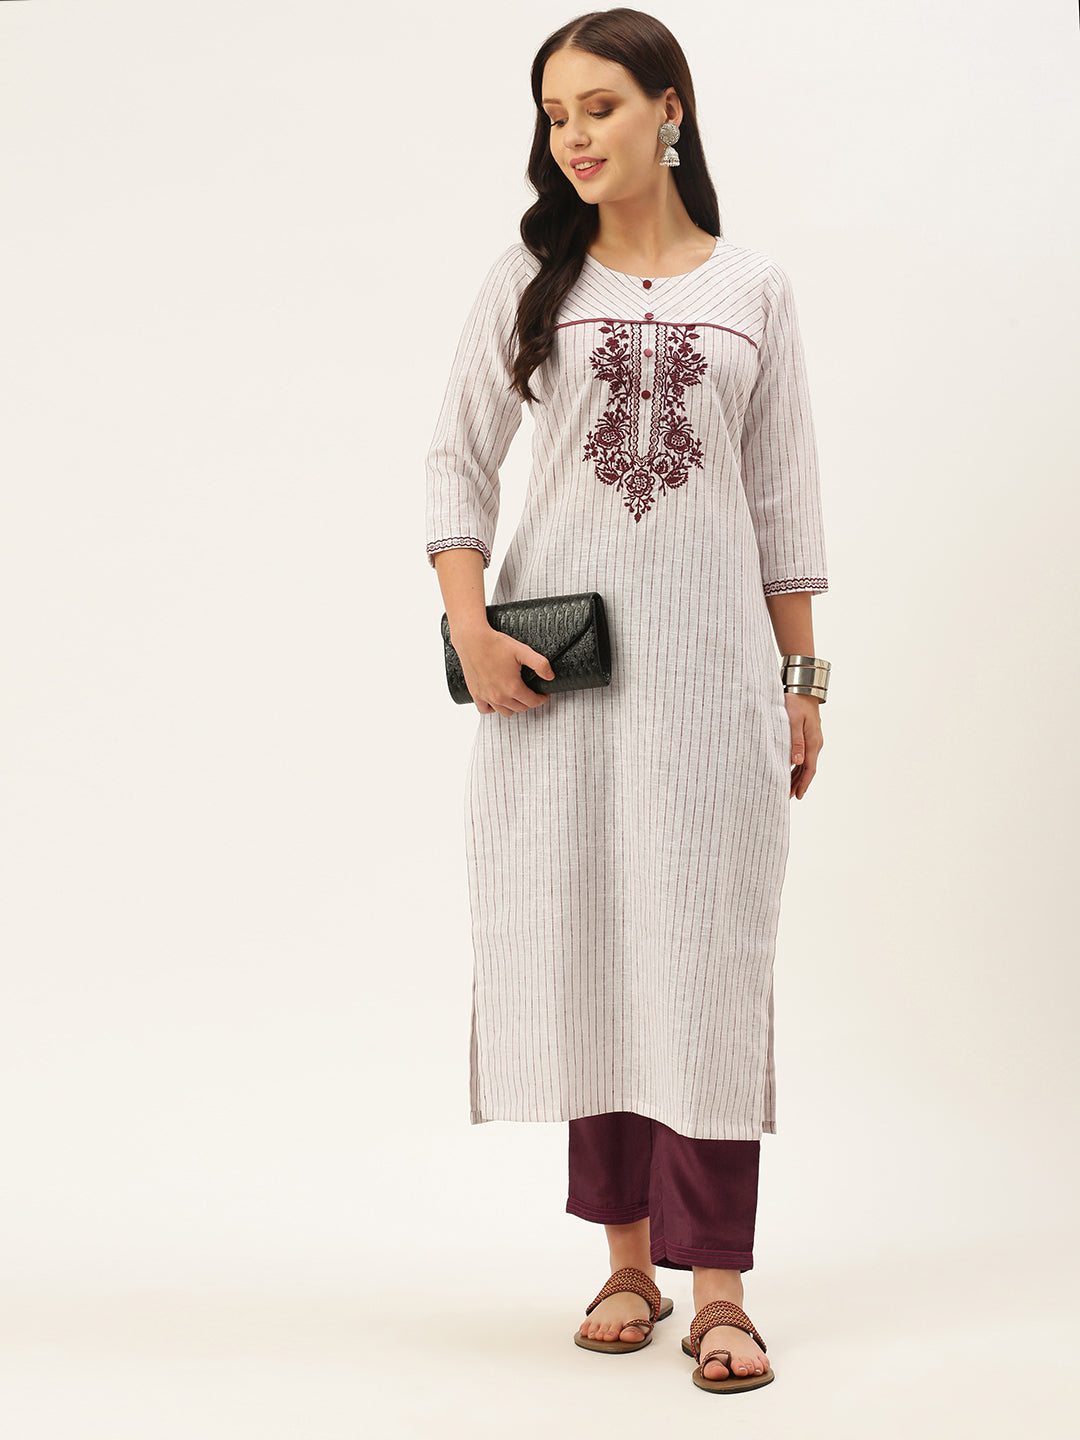 Women's White Color Cotton Blend Checked Striped Embroidered Kurta Pant Set - VAABA